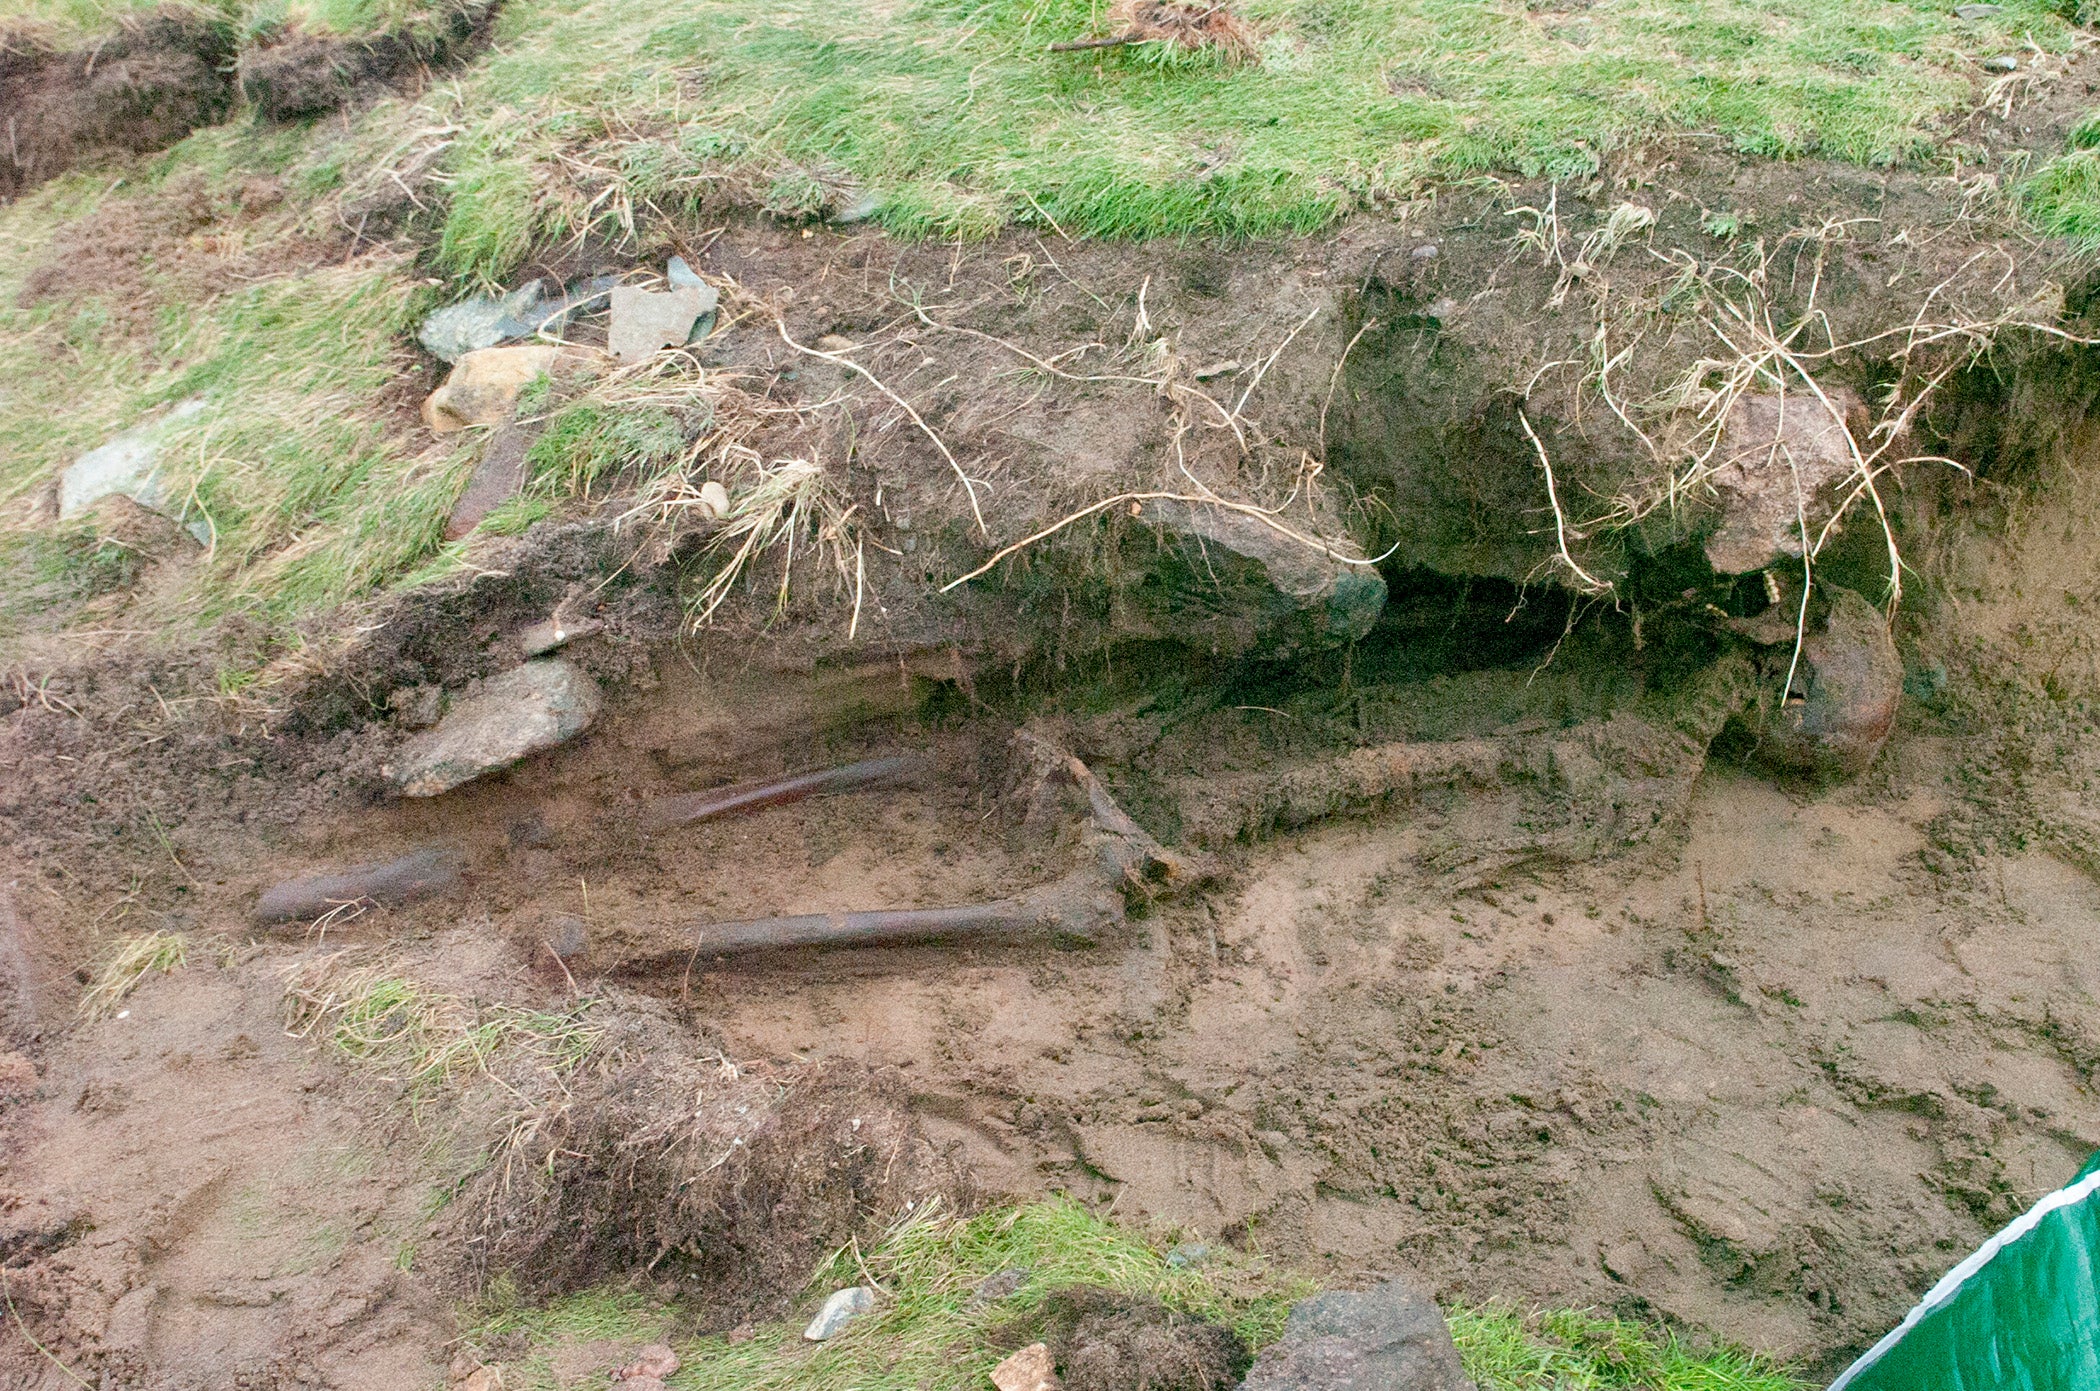 The remains could be part of an historic burial site